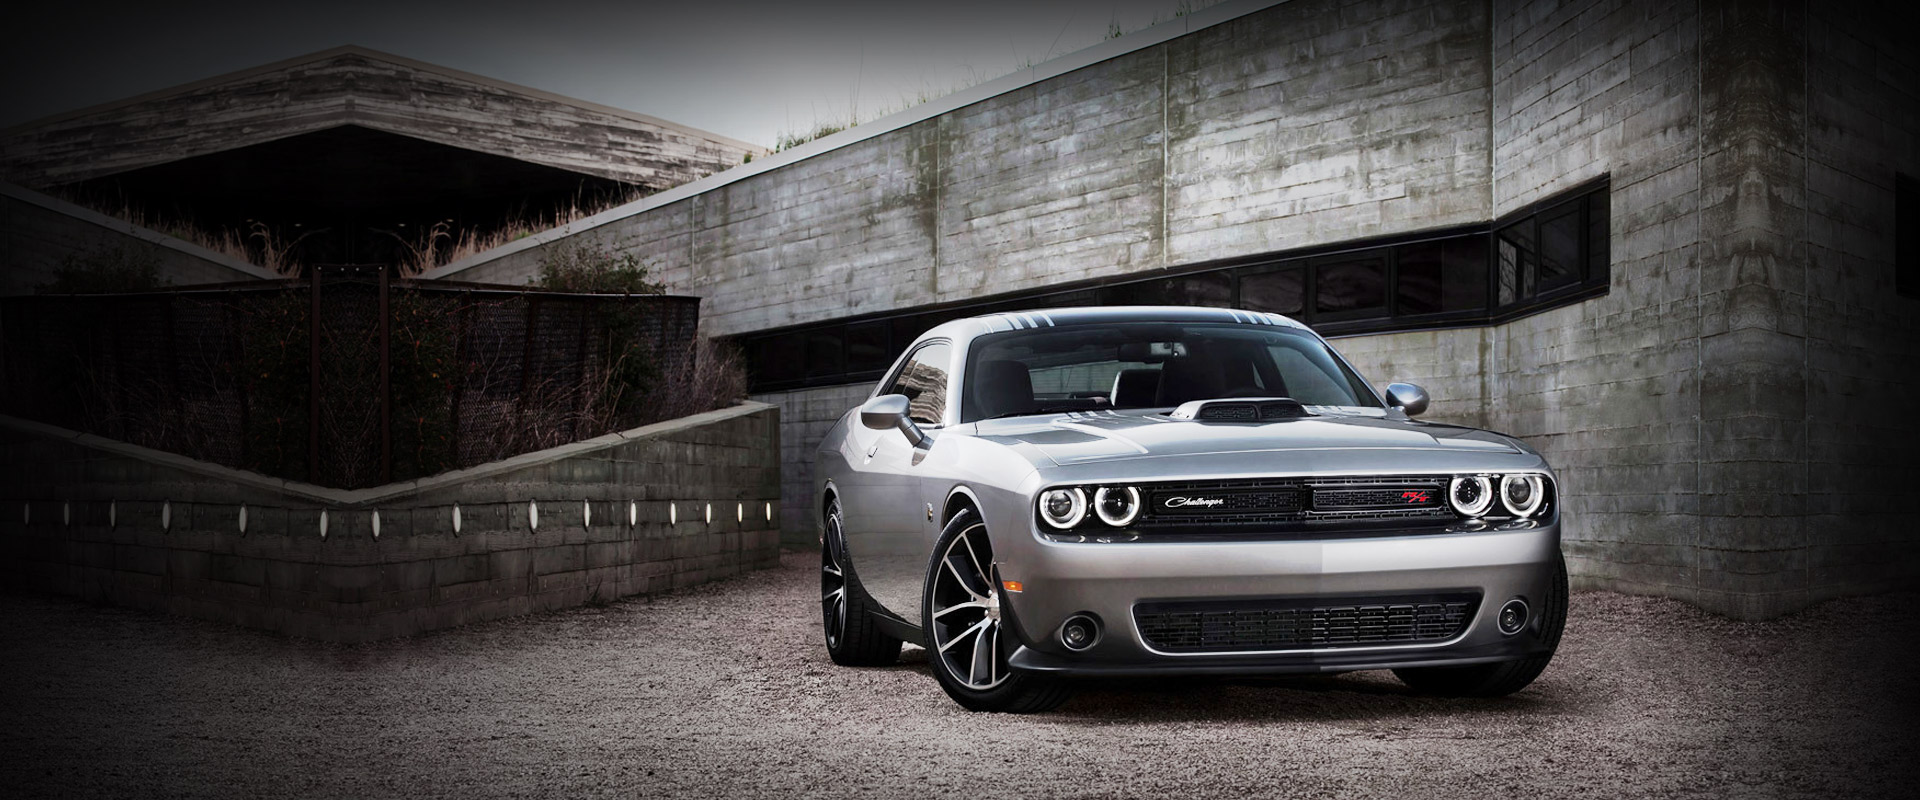 Dodge Challenger Rt Wallpaper And Background Image